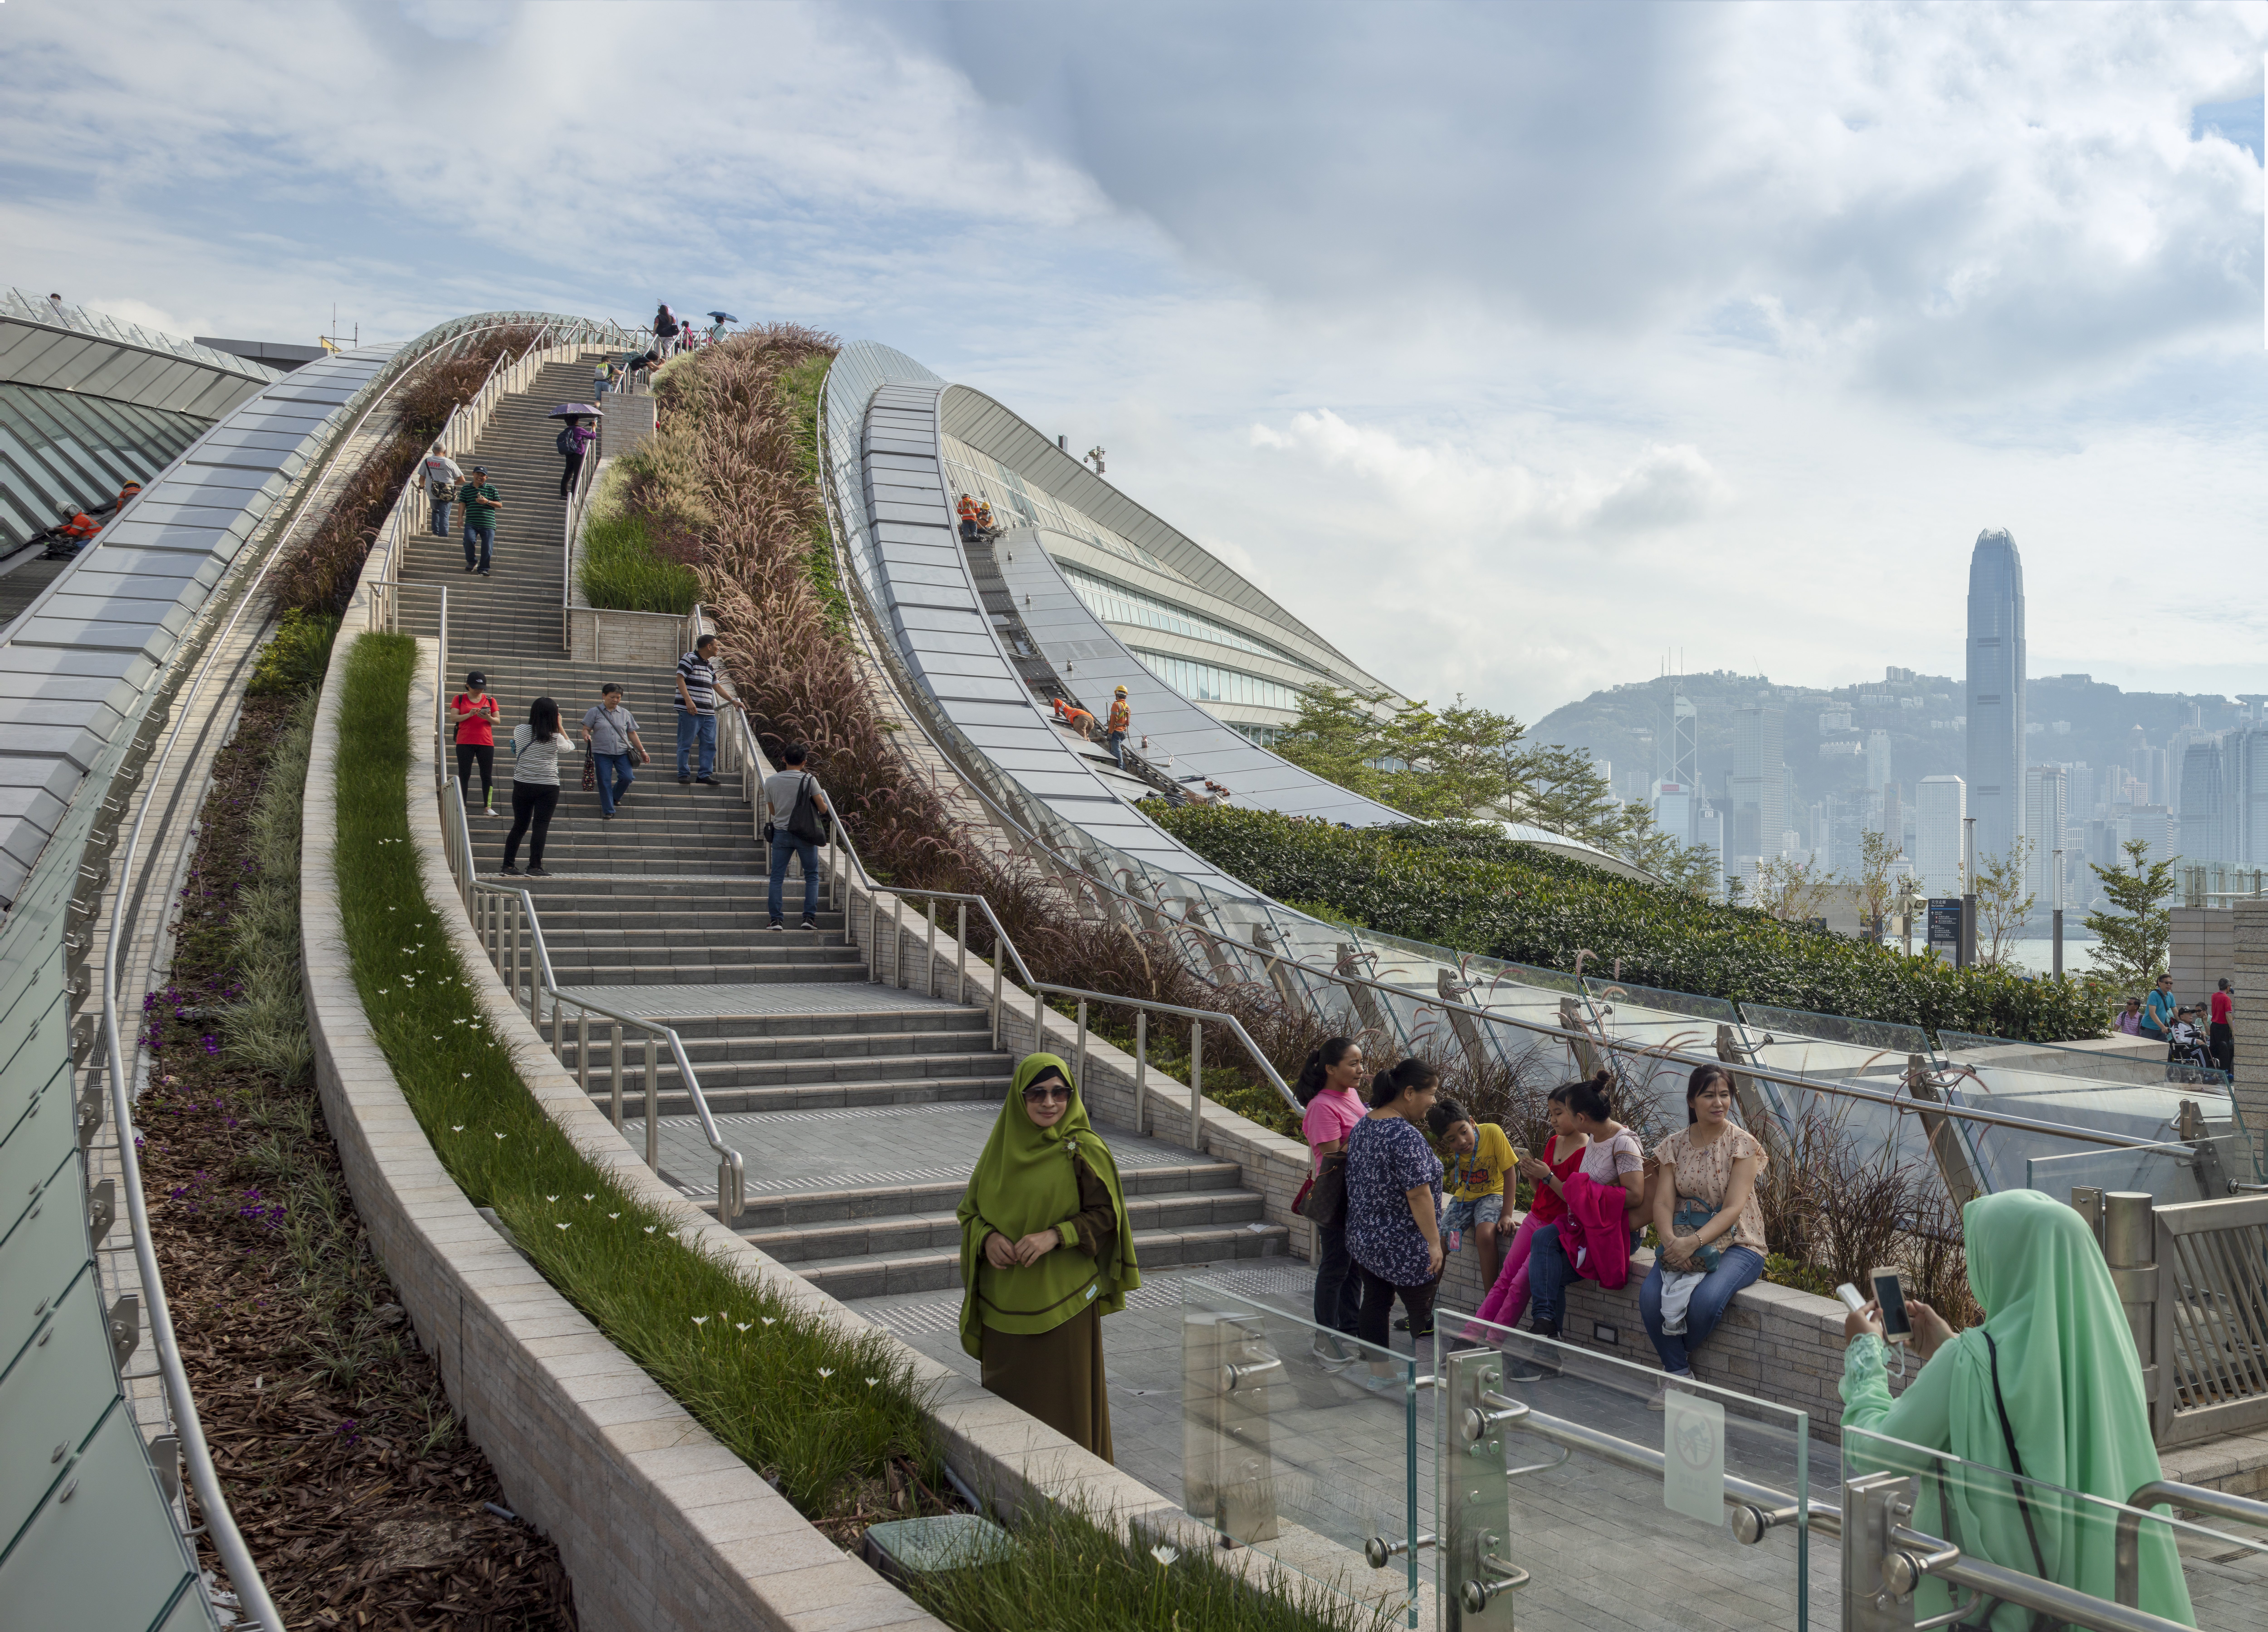 A sweeping staircase at the award-winning West Kowloon Station leads up to a plaza and is a place for social connection and greenery. Long curves and steps to the landscaped roof summon a spirit of nature. Photo: Paul Warchol